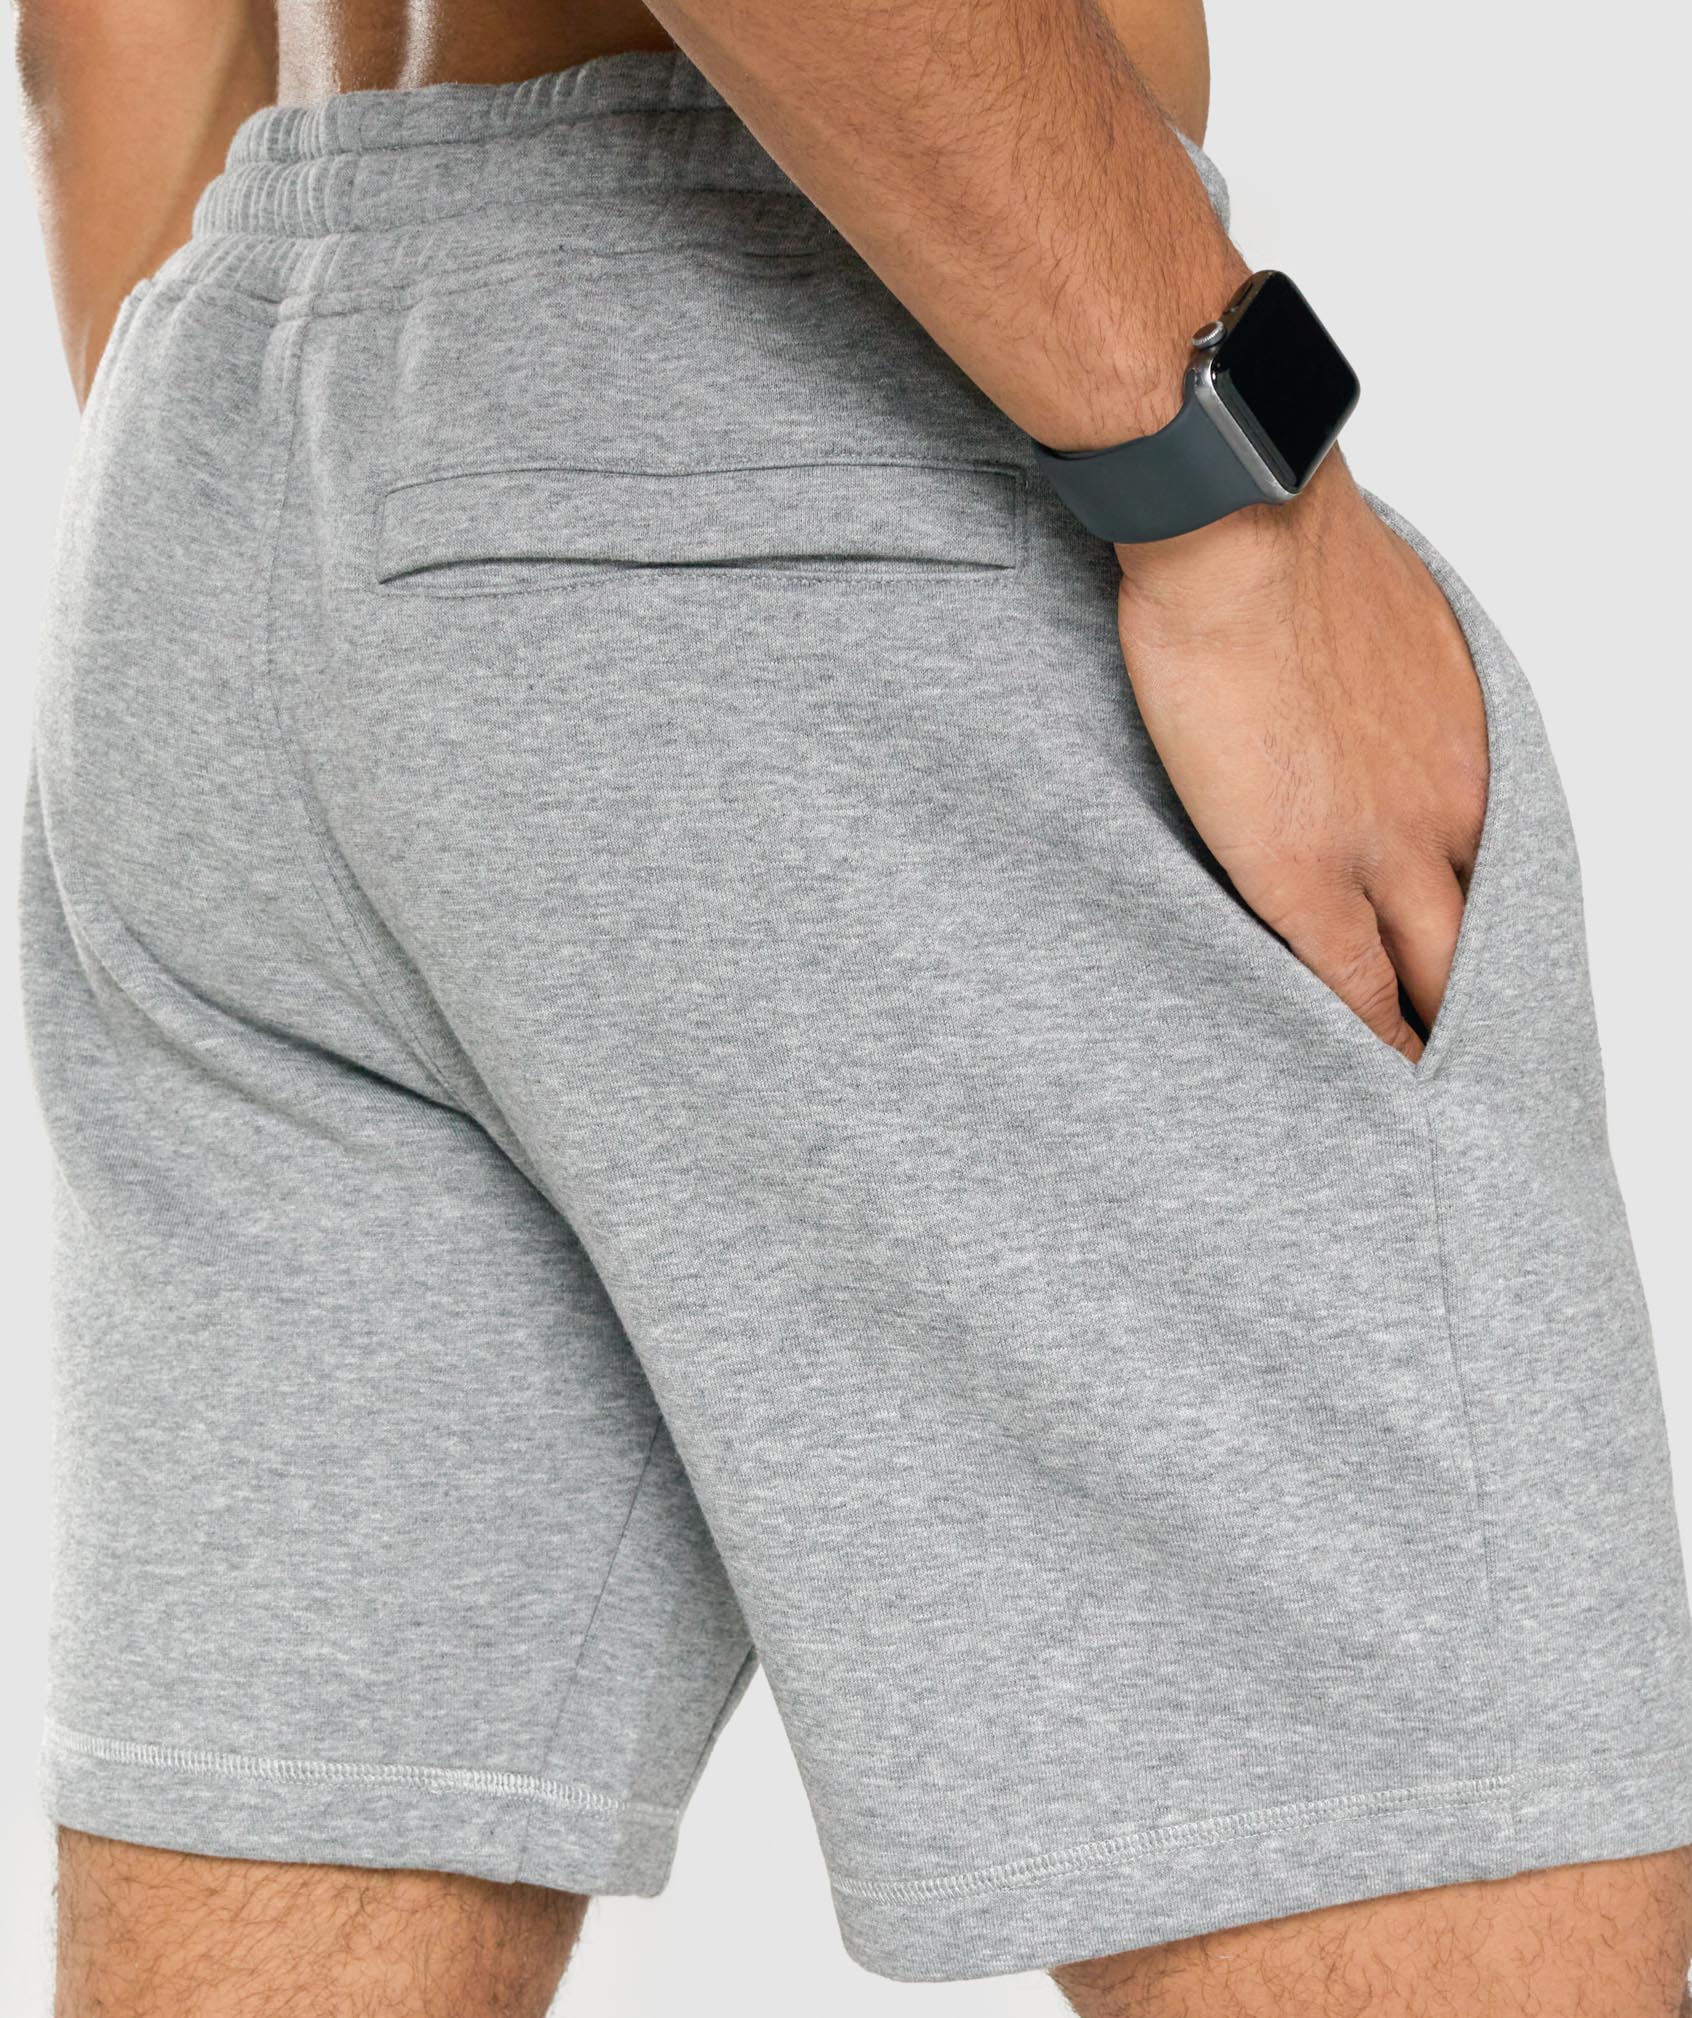 Crest Shorts in Charcoal Marl - view 7